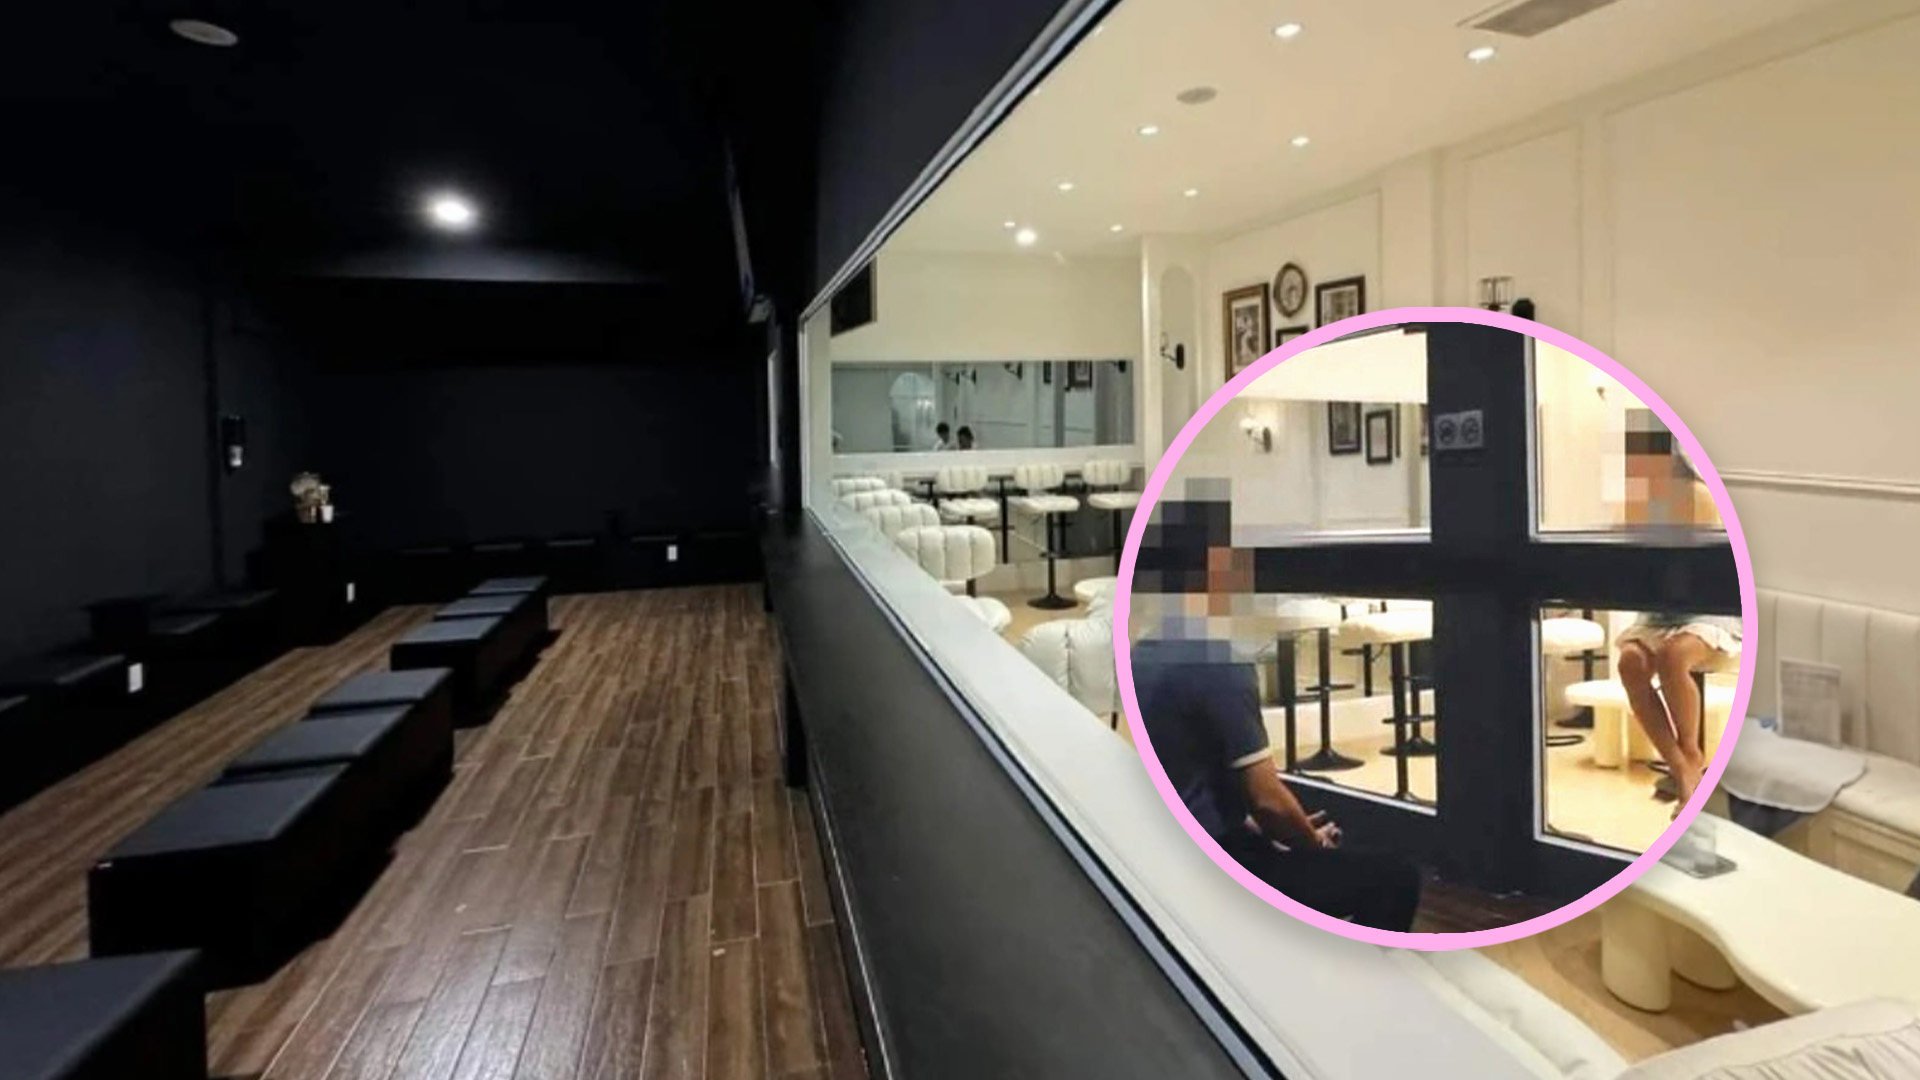 A “blind date” café in Vietnam is being investigated by police after it was found to be using a one way mirror to allow men to ogle women. Photo: SCMP composite/TikTok/QQ.com